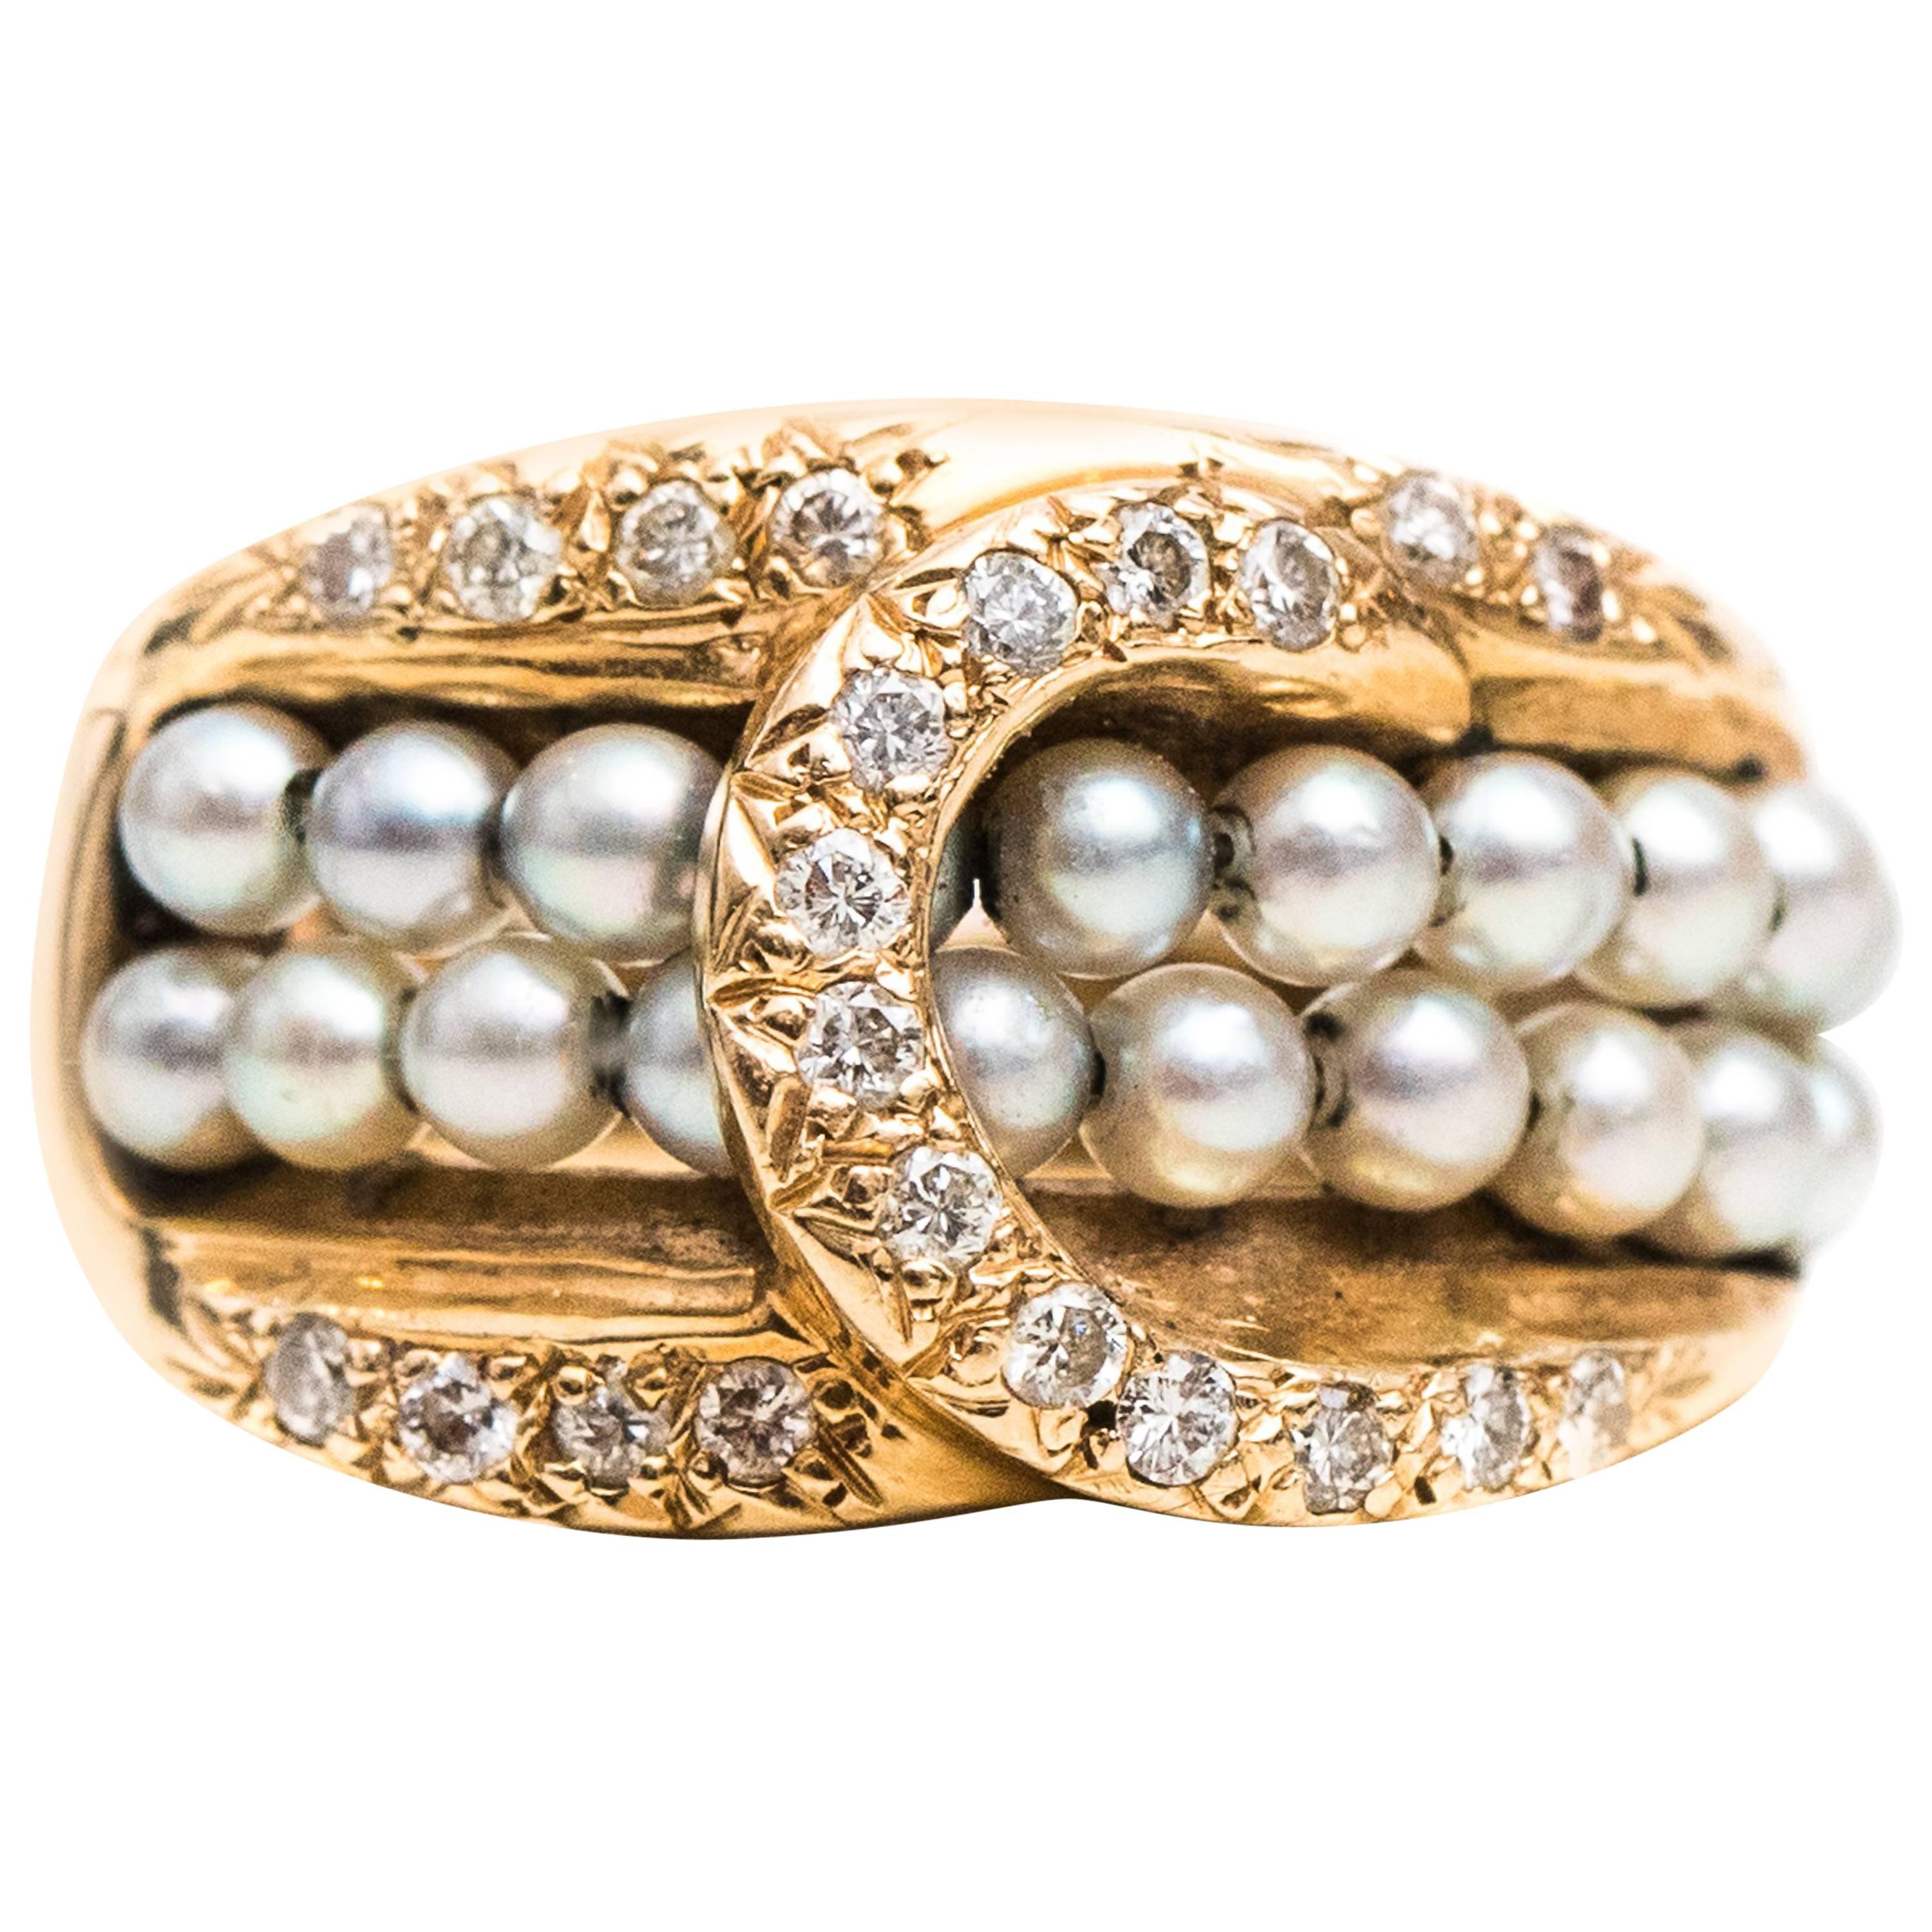 Diamond, Pearl and 14 Karat Yellow Gold Belt Buckle Cocktail Ring